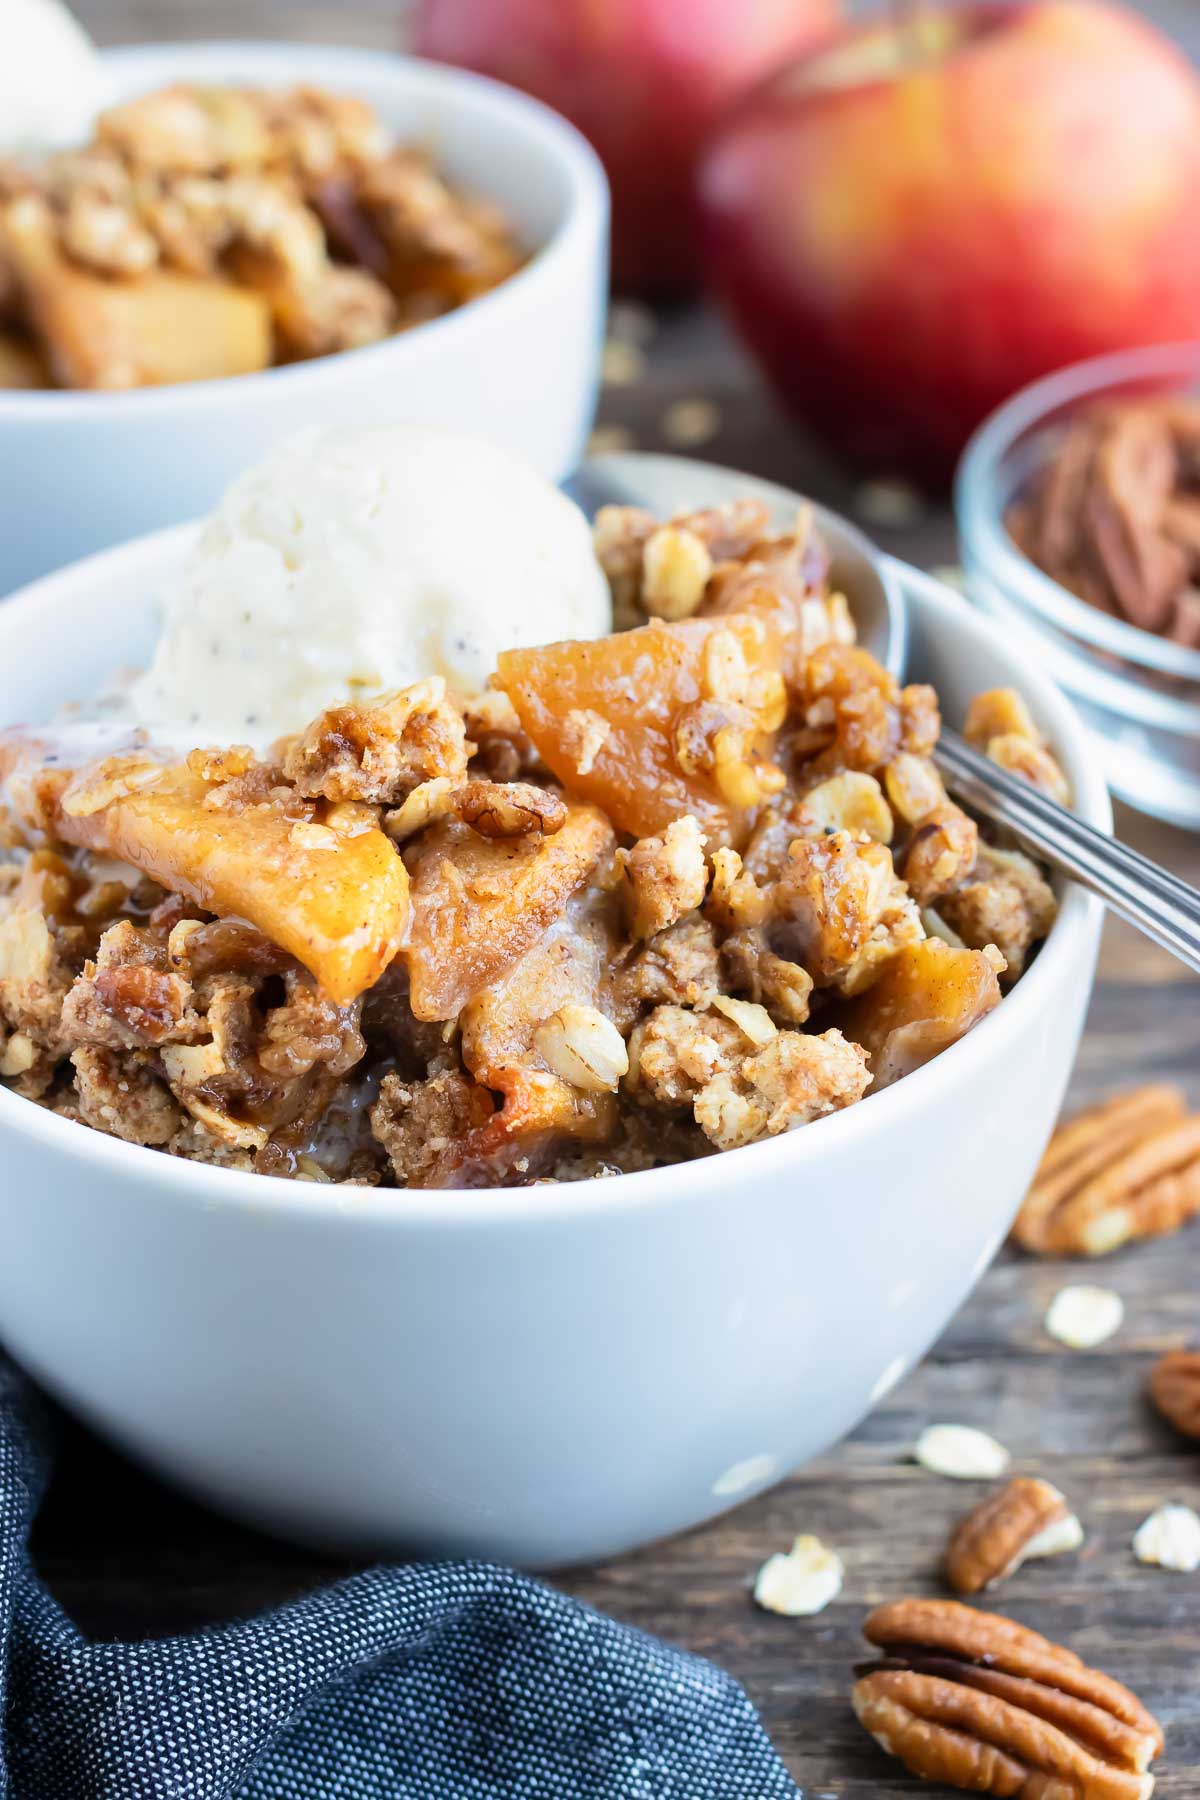 Two dessert bowls full of a gluten-free apple crisp recipe with an oatmeal and pecan crumb topping.